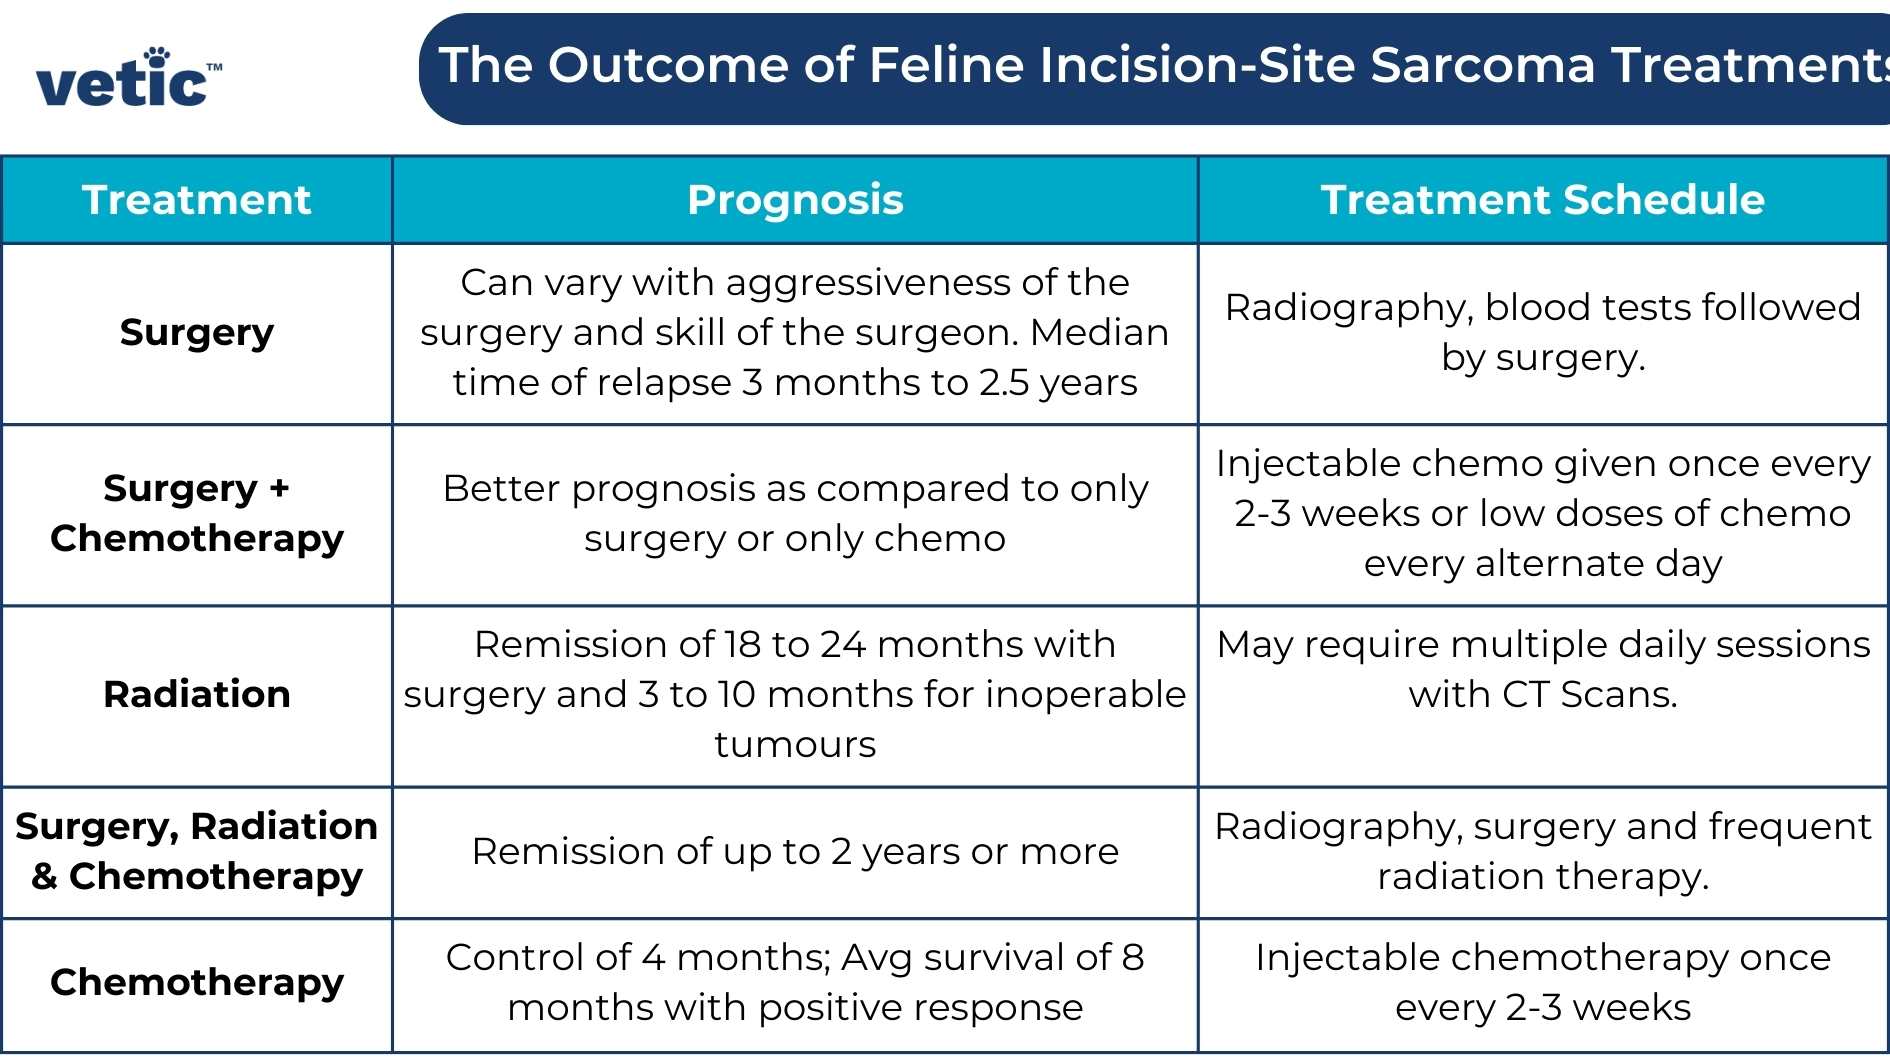 A comprehensive table on the varying outcomes of the treatments for Feline Incision-site Sarcoma. Treatment Prognosis Treatment Schedule Surgery Can vary with aggressiveness of the surgery and skill of the surgeon. Median time of relapse 3 months to 2.5 years "Radiography, blood tests followed by surgery." Surgery + Chemotherapy Better prognosis as compared to only surgery or only chemo Injectable chemo given once every 2-3 weeks or low doses of chemo every alternate day Radiation Remission of 18 to 24 months with surgery and 3 to 10 months for inoperable tumours "May require multiple daily sessions with CT Scans. " "Surgery, Radiation & Chemotherapy" Remission of up to 2 years or more "Radiography, surgery and frequent radiation therapy." Chemotherapy "Control of 4 months; Avg survival of 8 months with positive response" Injectable chemotherapy once every 2-3 weeks